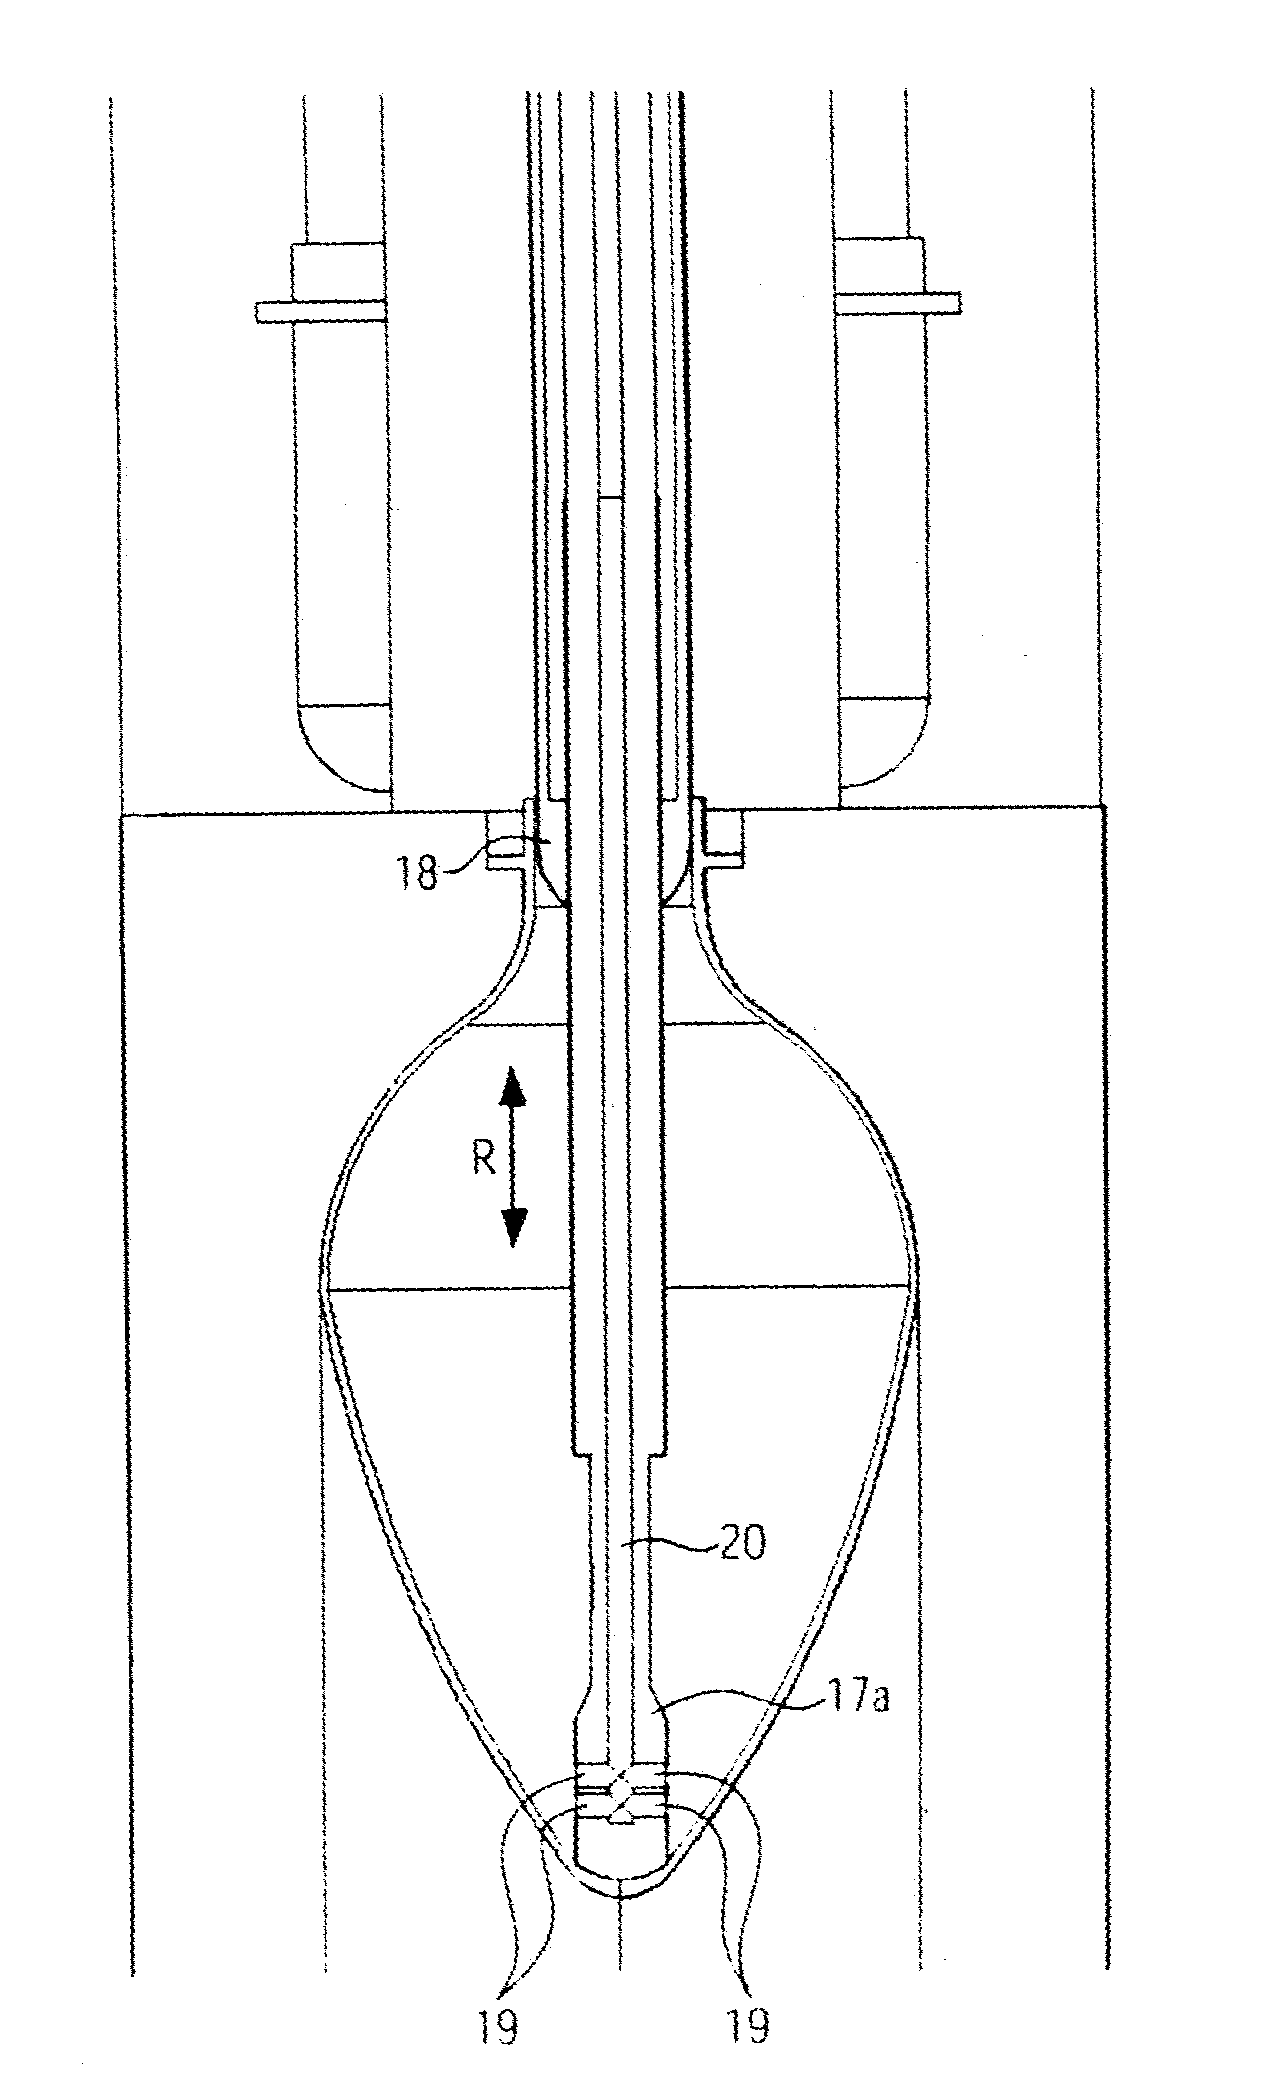 Device and Method for Manufacturing Plastic Containers